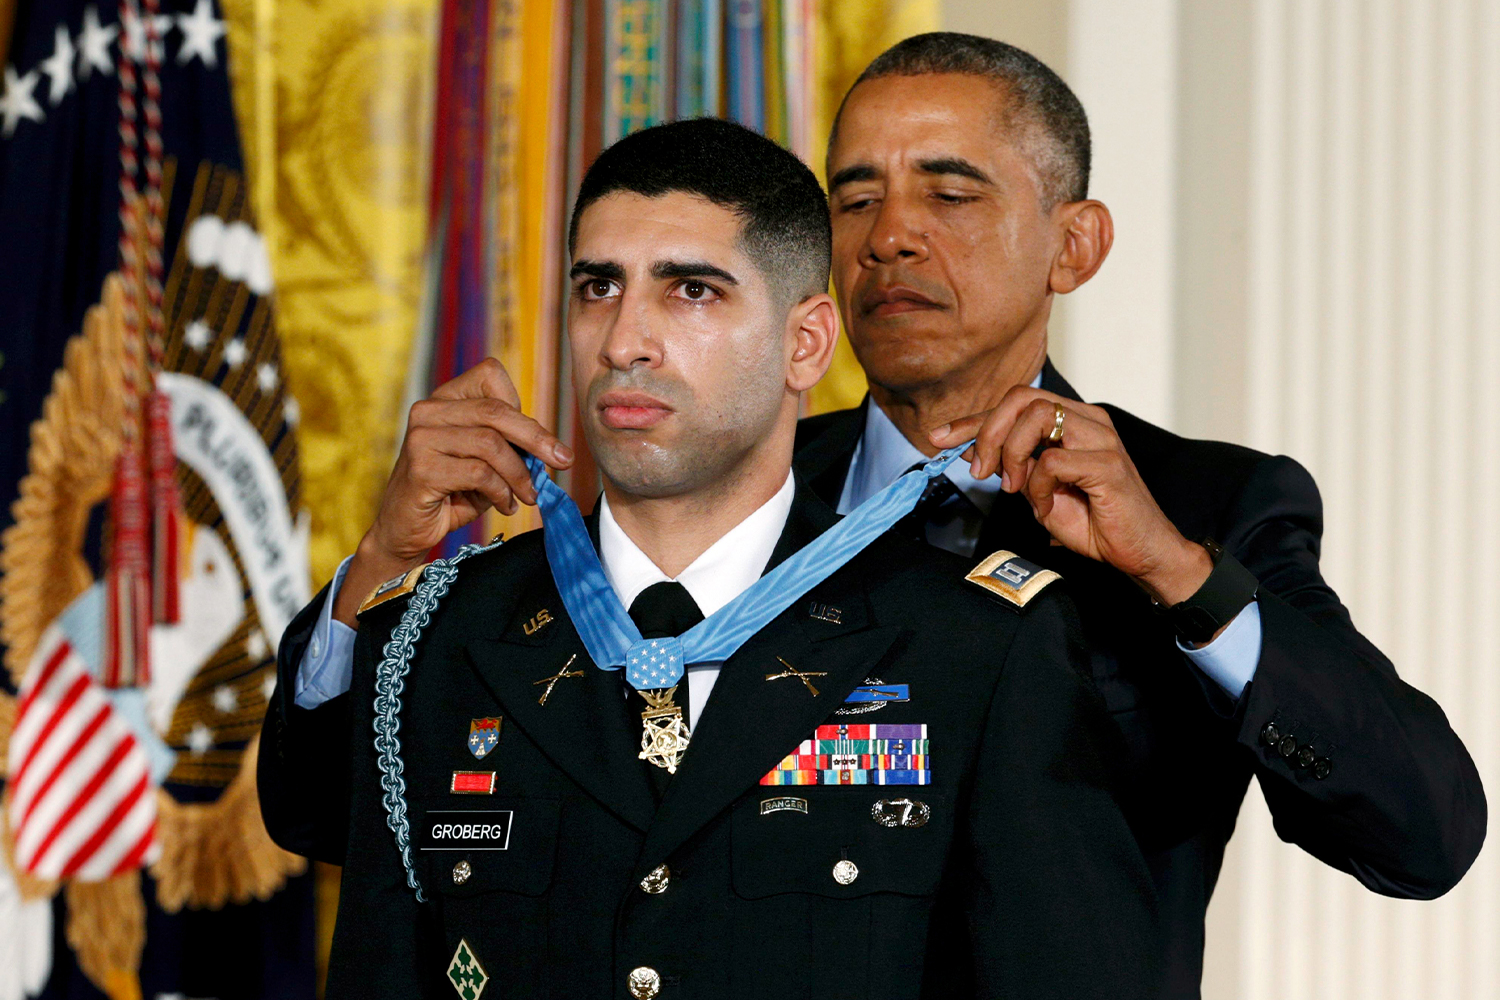 Medal of Honor Recipient Florent Groberg Remembers the Day That Changed His Life